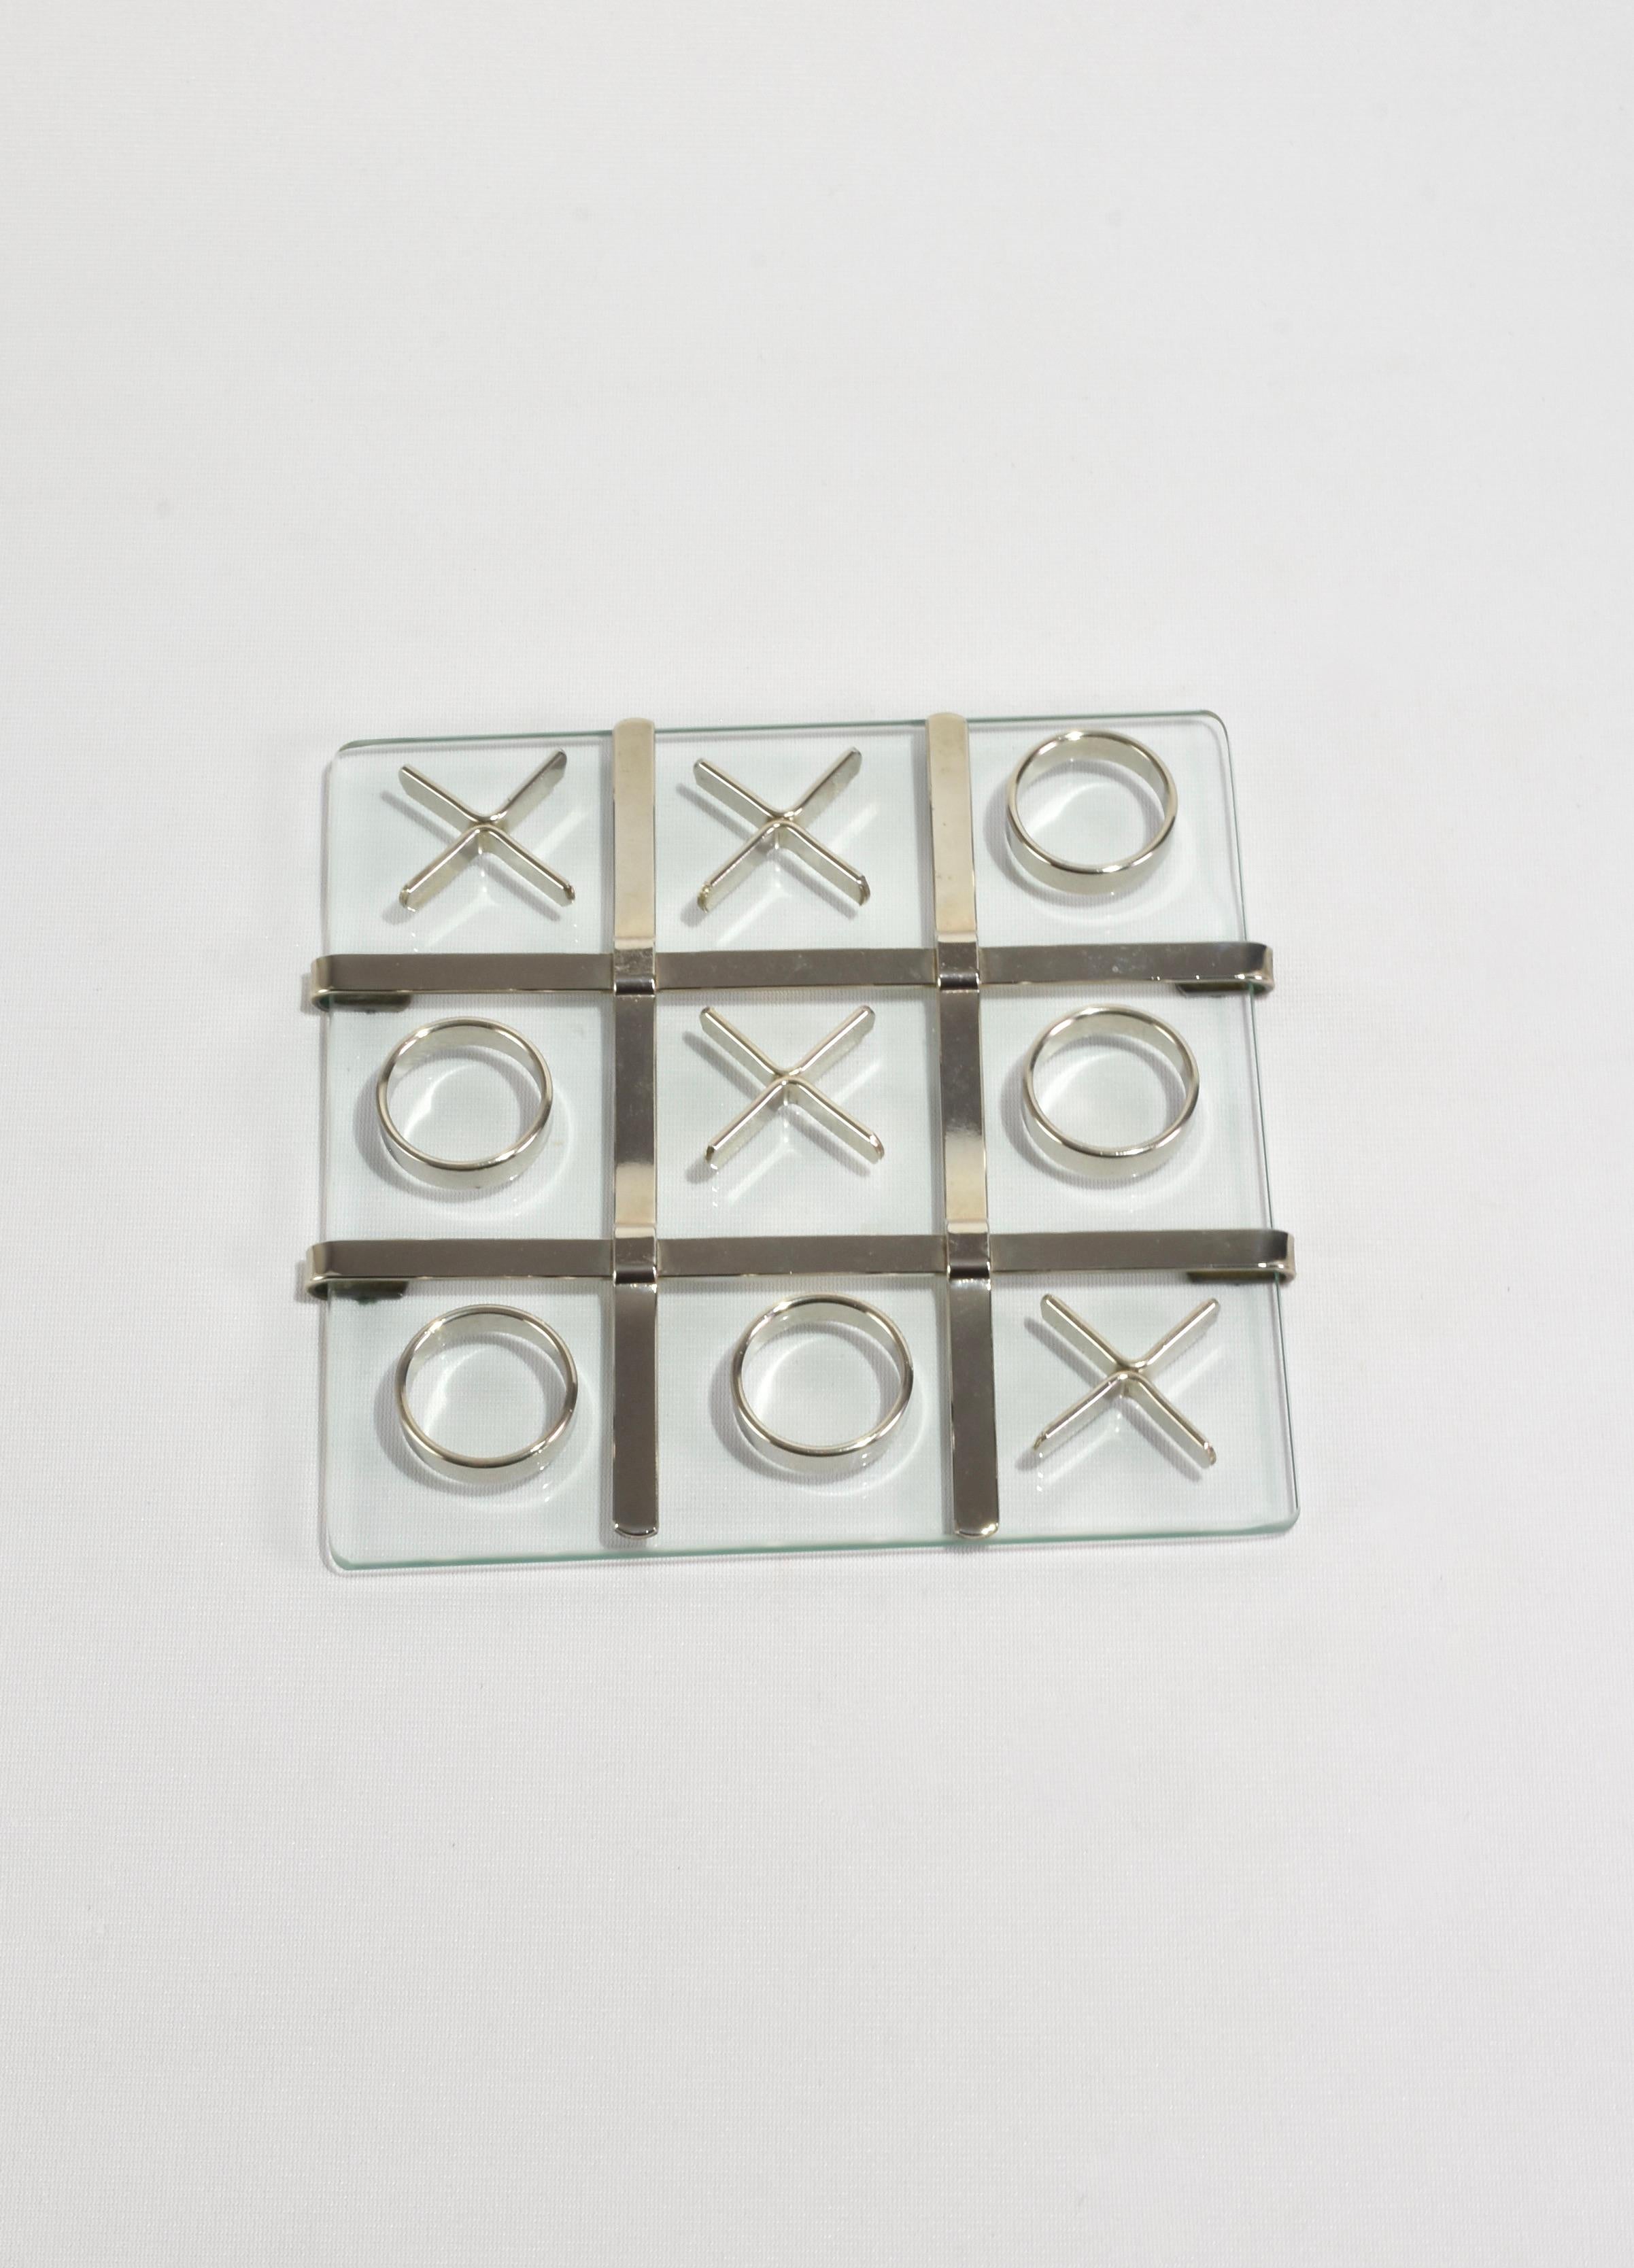 Stunning vintage tic-tac-toe set with a glass base, silver detail and ten silver pieces. One-of-a-kind piece.

Dimensions:
Board measures 8